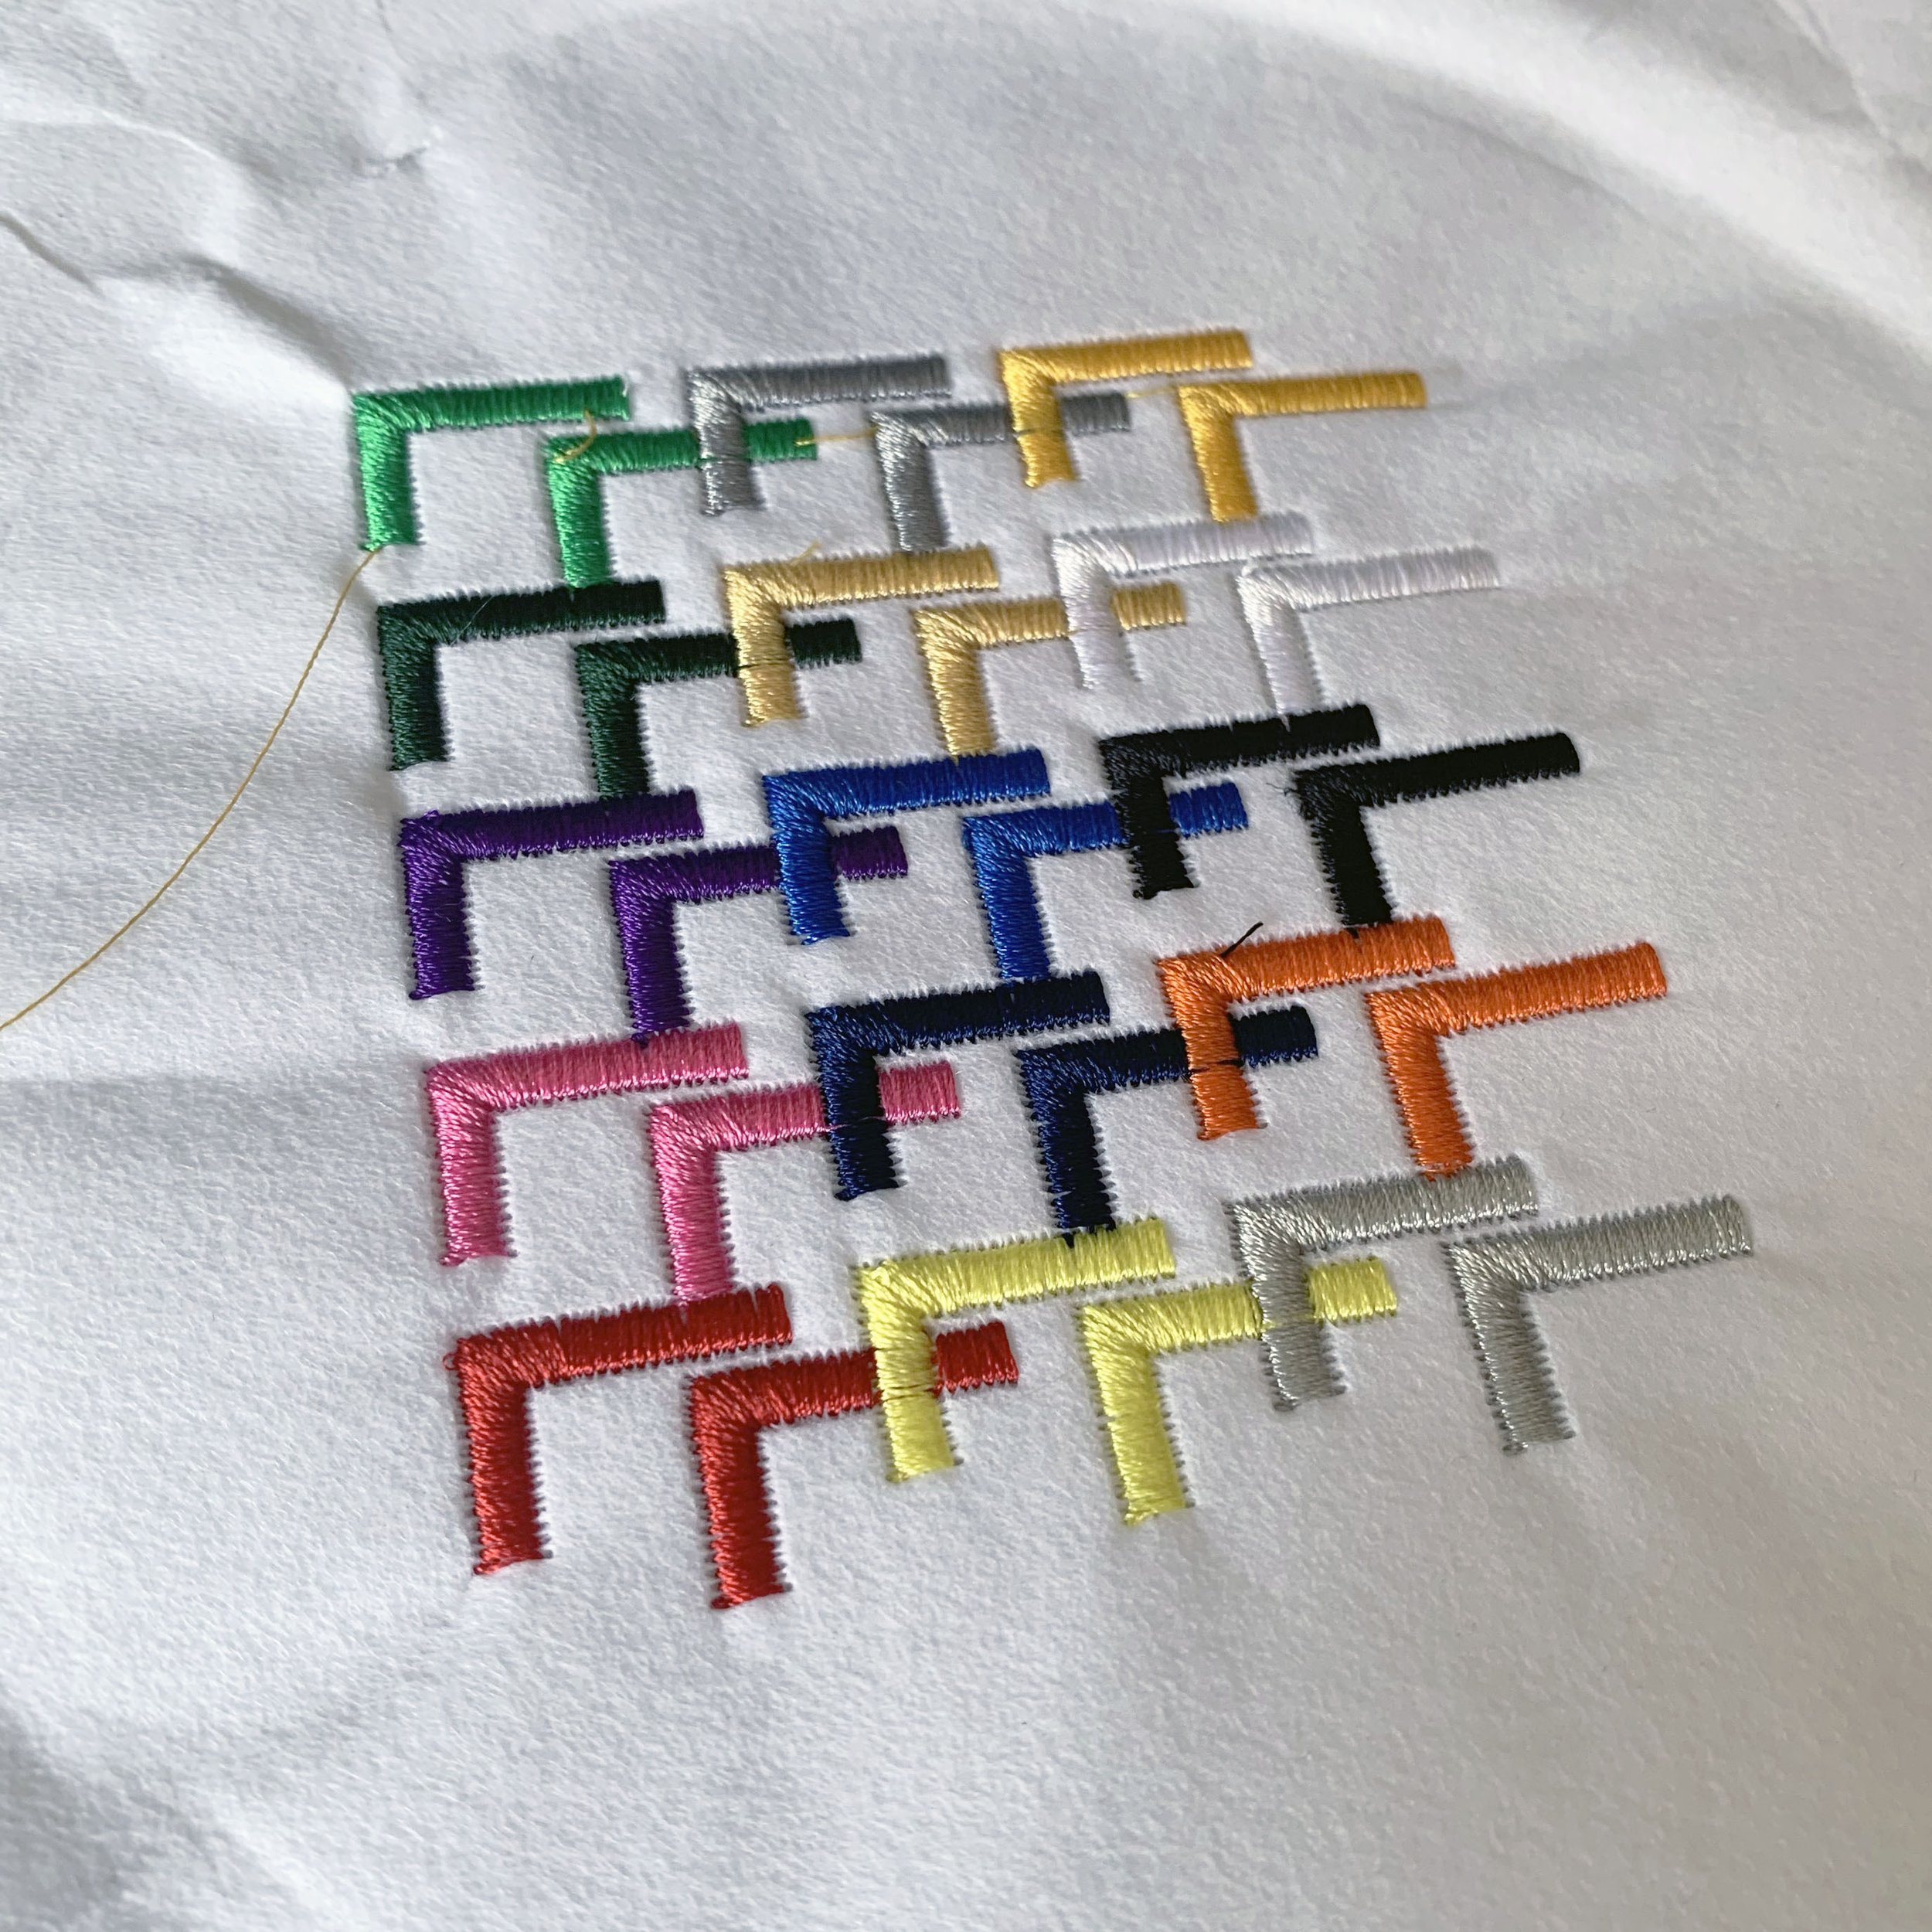 Embroidered Logo: an array of overlapping right angle brackets of varying colors